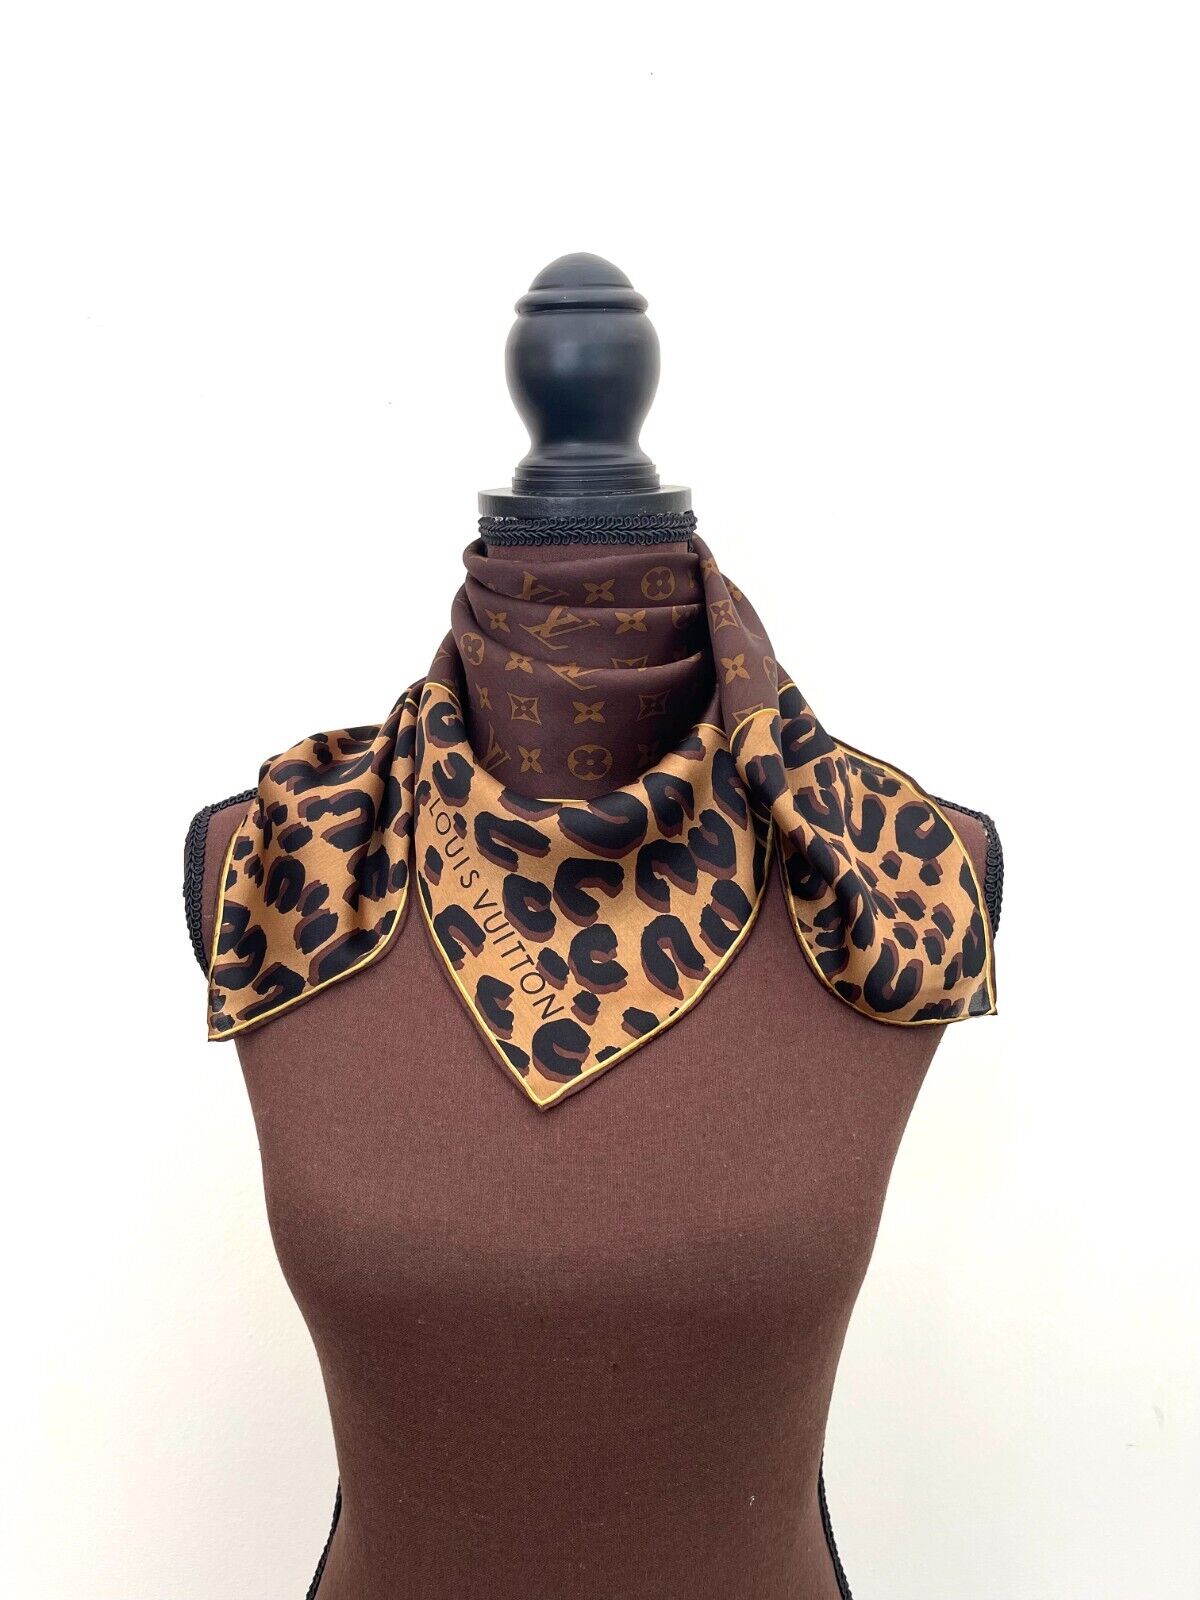 How to wear a Louis Vuitton silk square scarf - tutorial 4 easy ways to wear  around your neck 